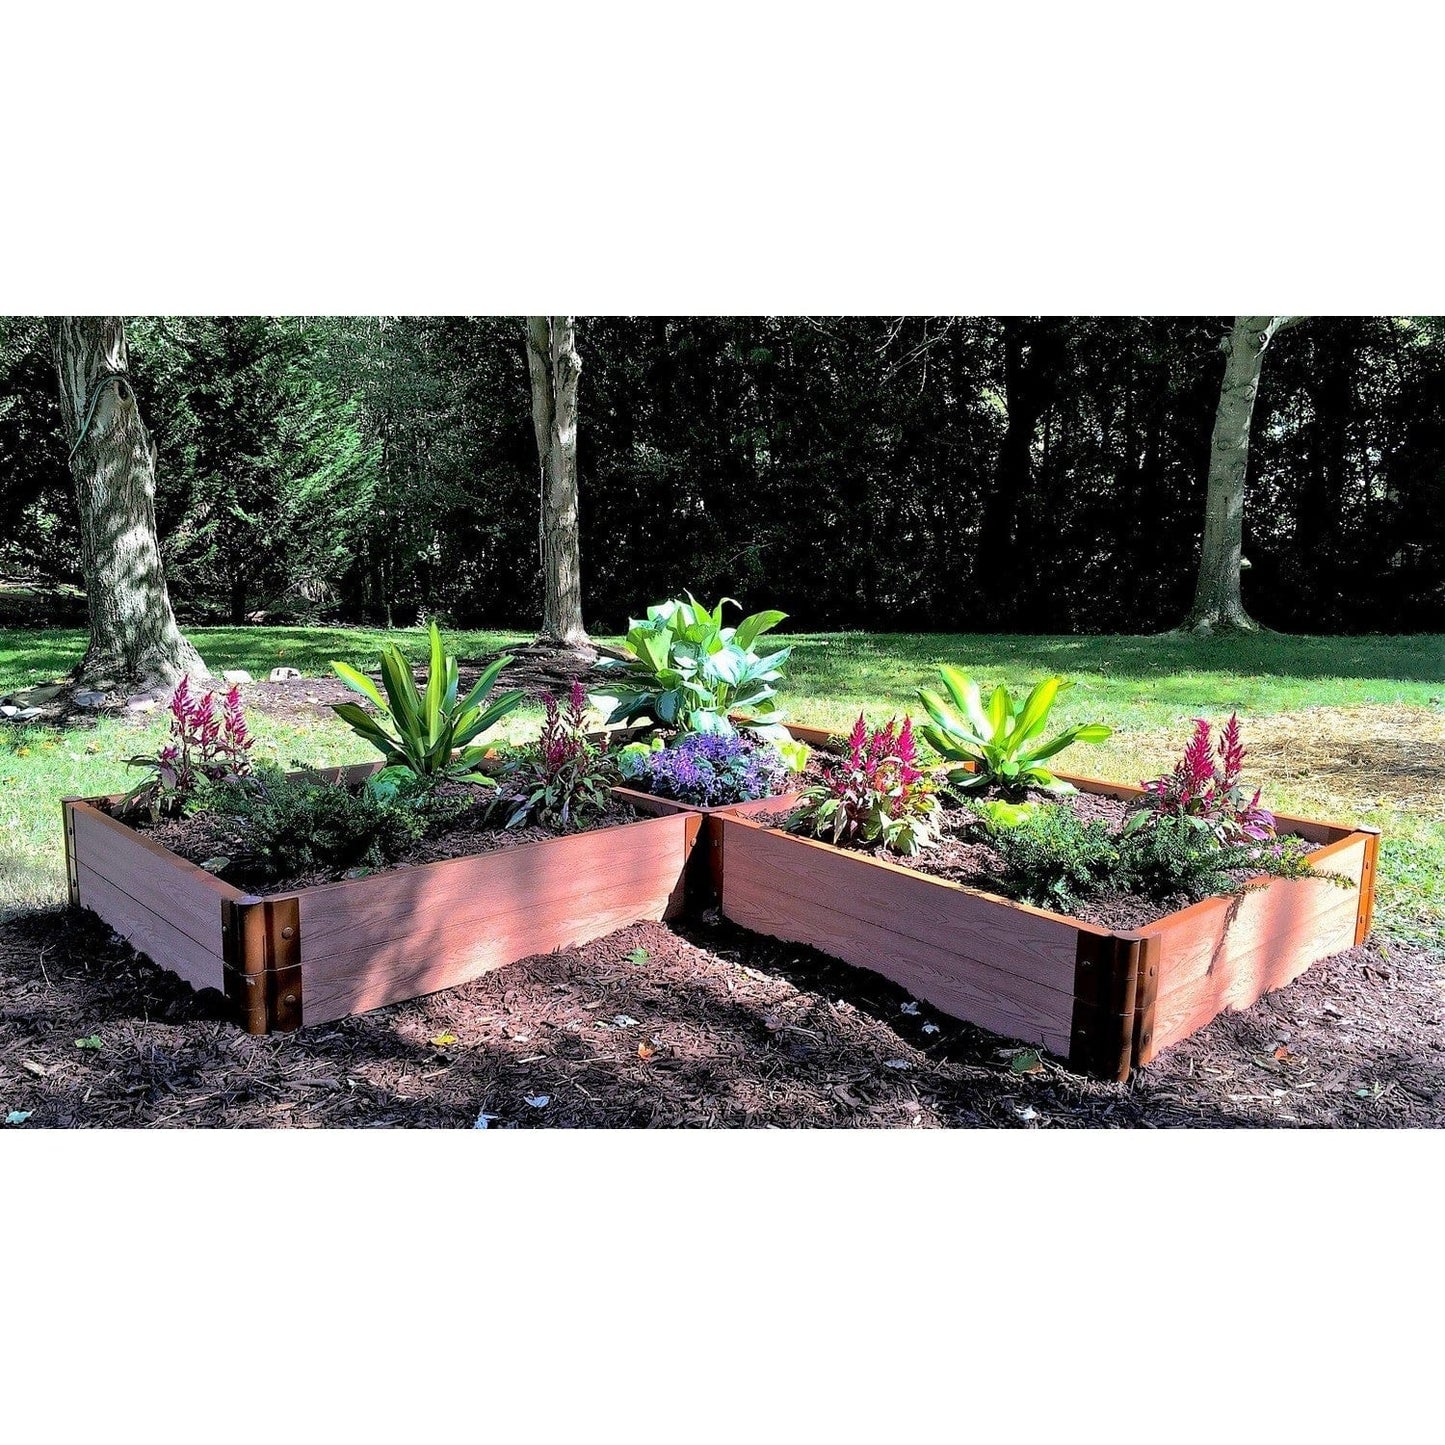 Frame It All Gardening Accessories Frame It All | Tool-Free Arrowhead Straight Corner Raised Garden Bed 8' X 8' X 22" - Uptown Brown - 1" Profile 800004003